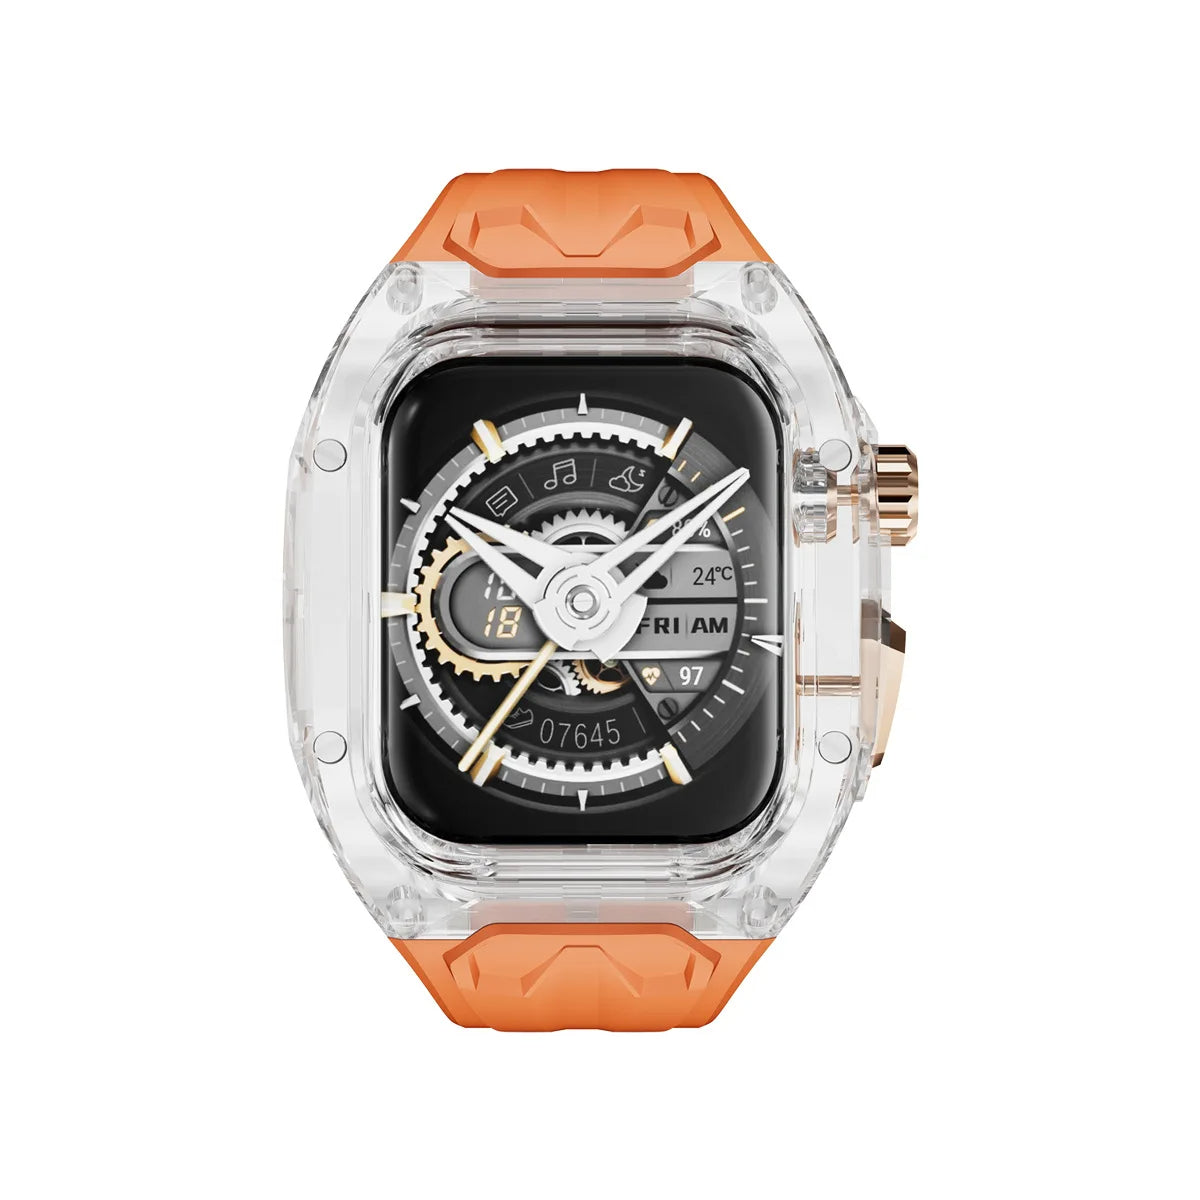 Luxury Transparent Case by iSerieshub Compatible for Apple Watch